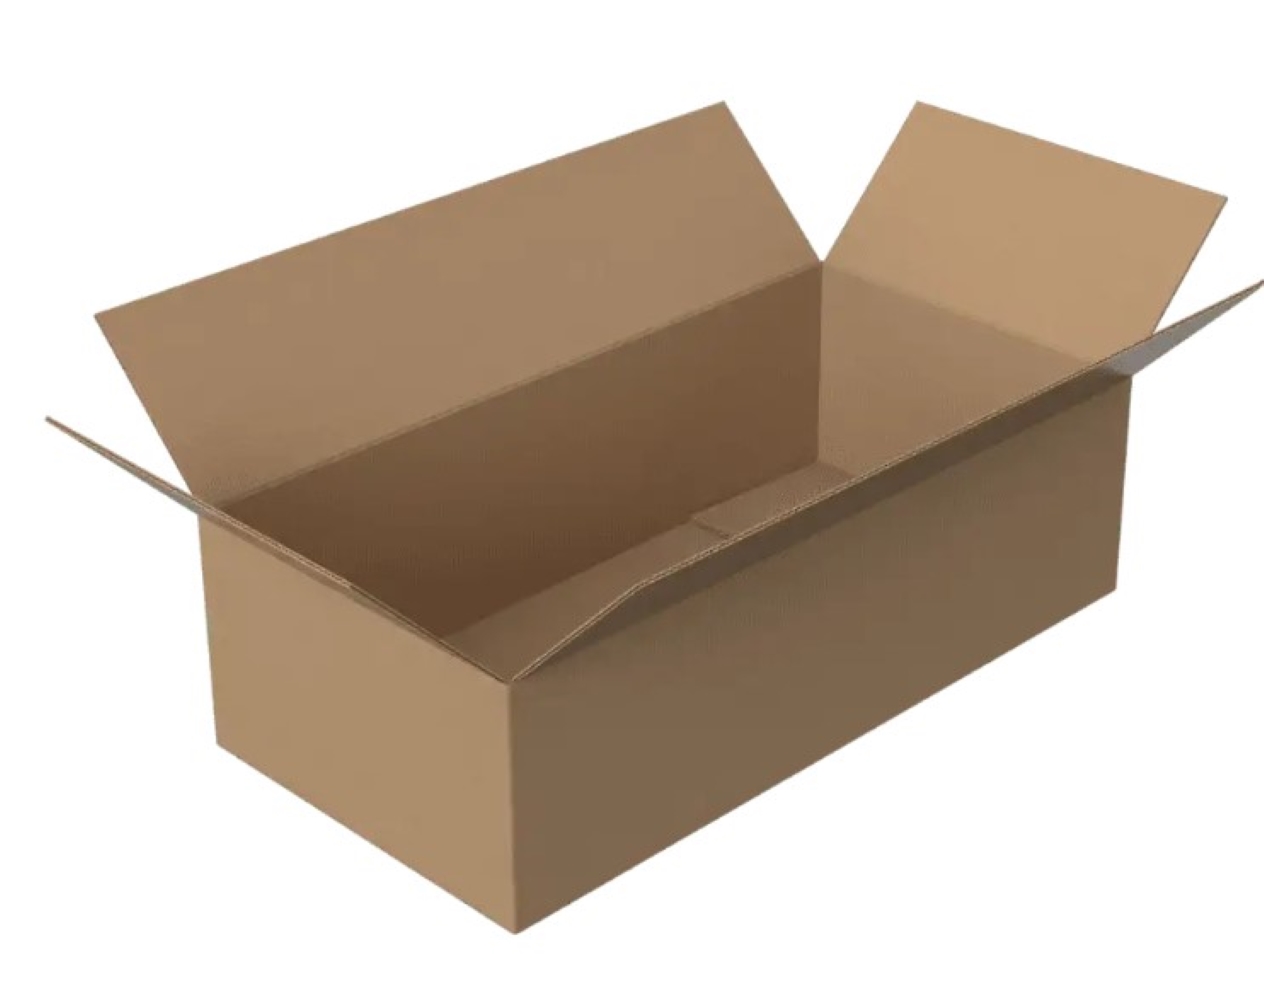 A Strong flat box made of twin cardboard, designed with double strength for durability. It is rectangular and has a smooth internal surface. It is ready for storage or shipping purposes.